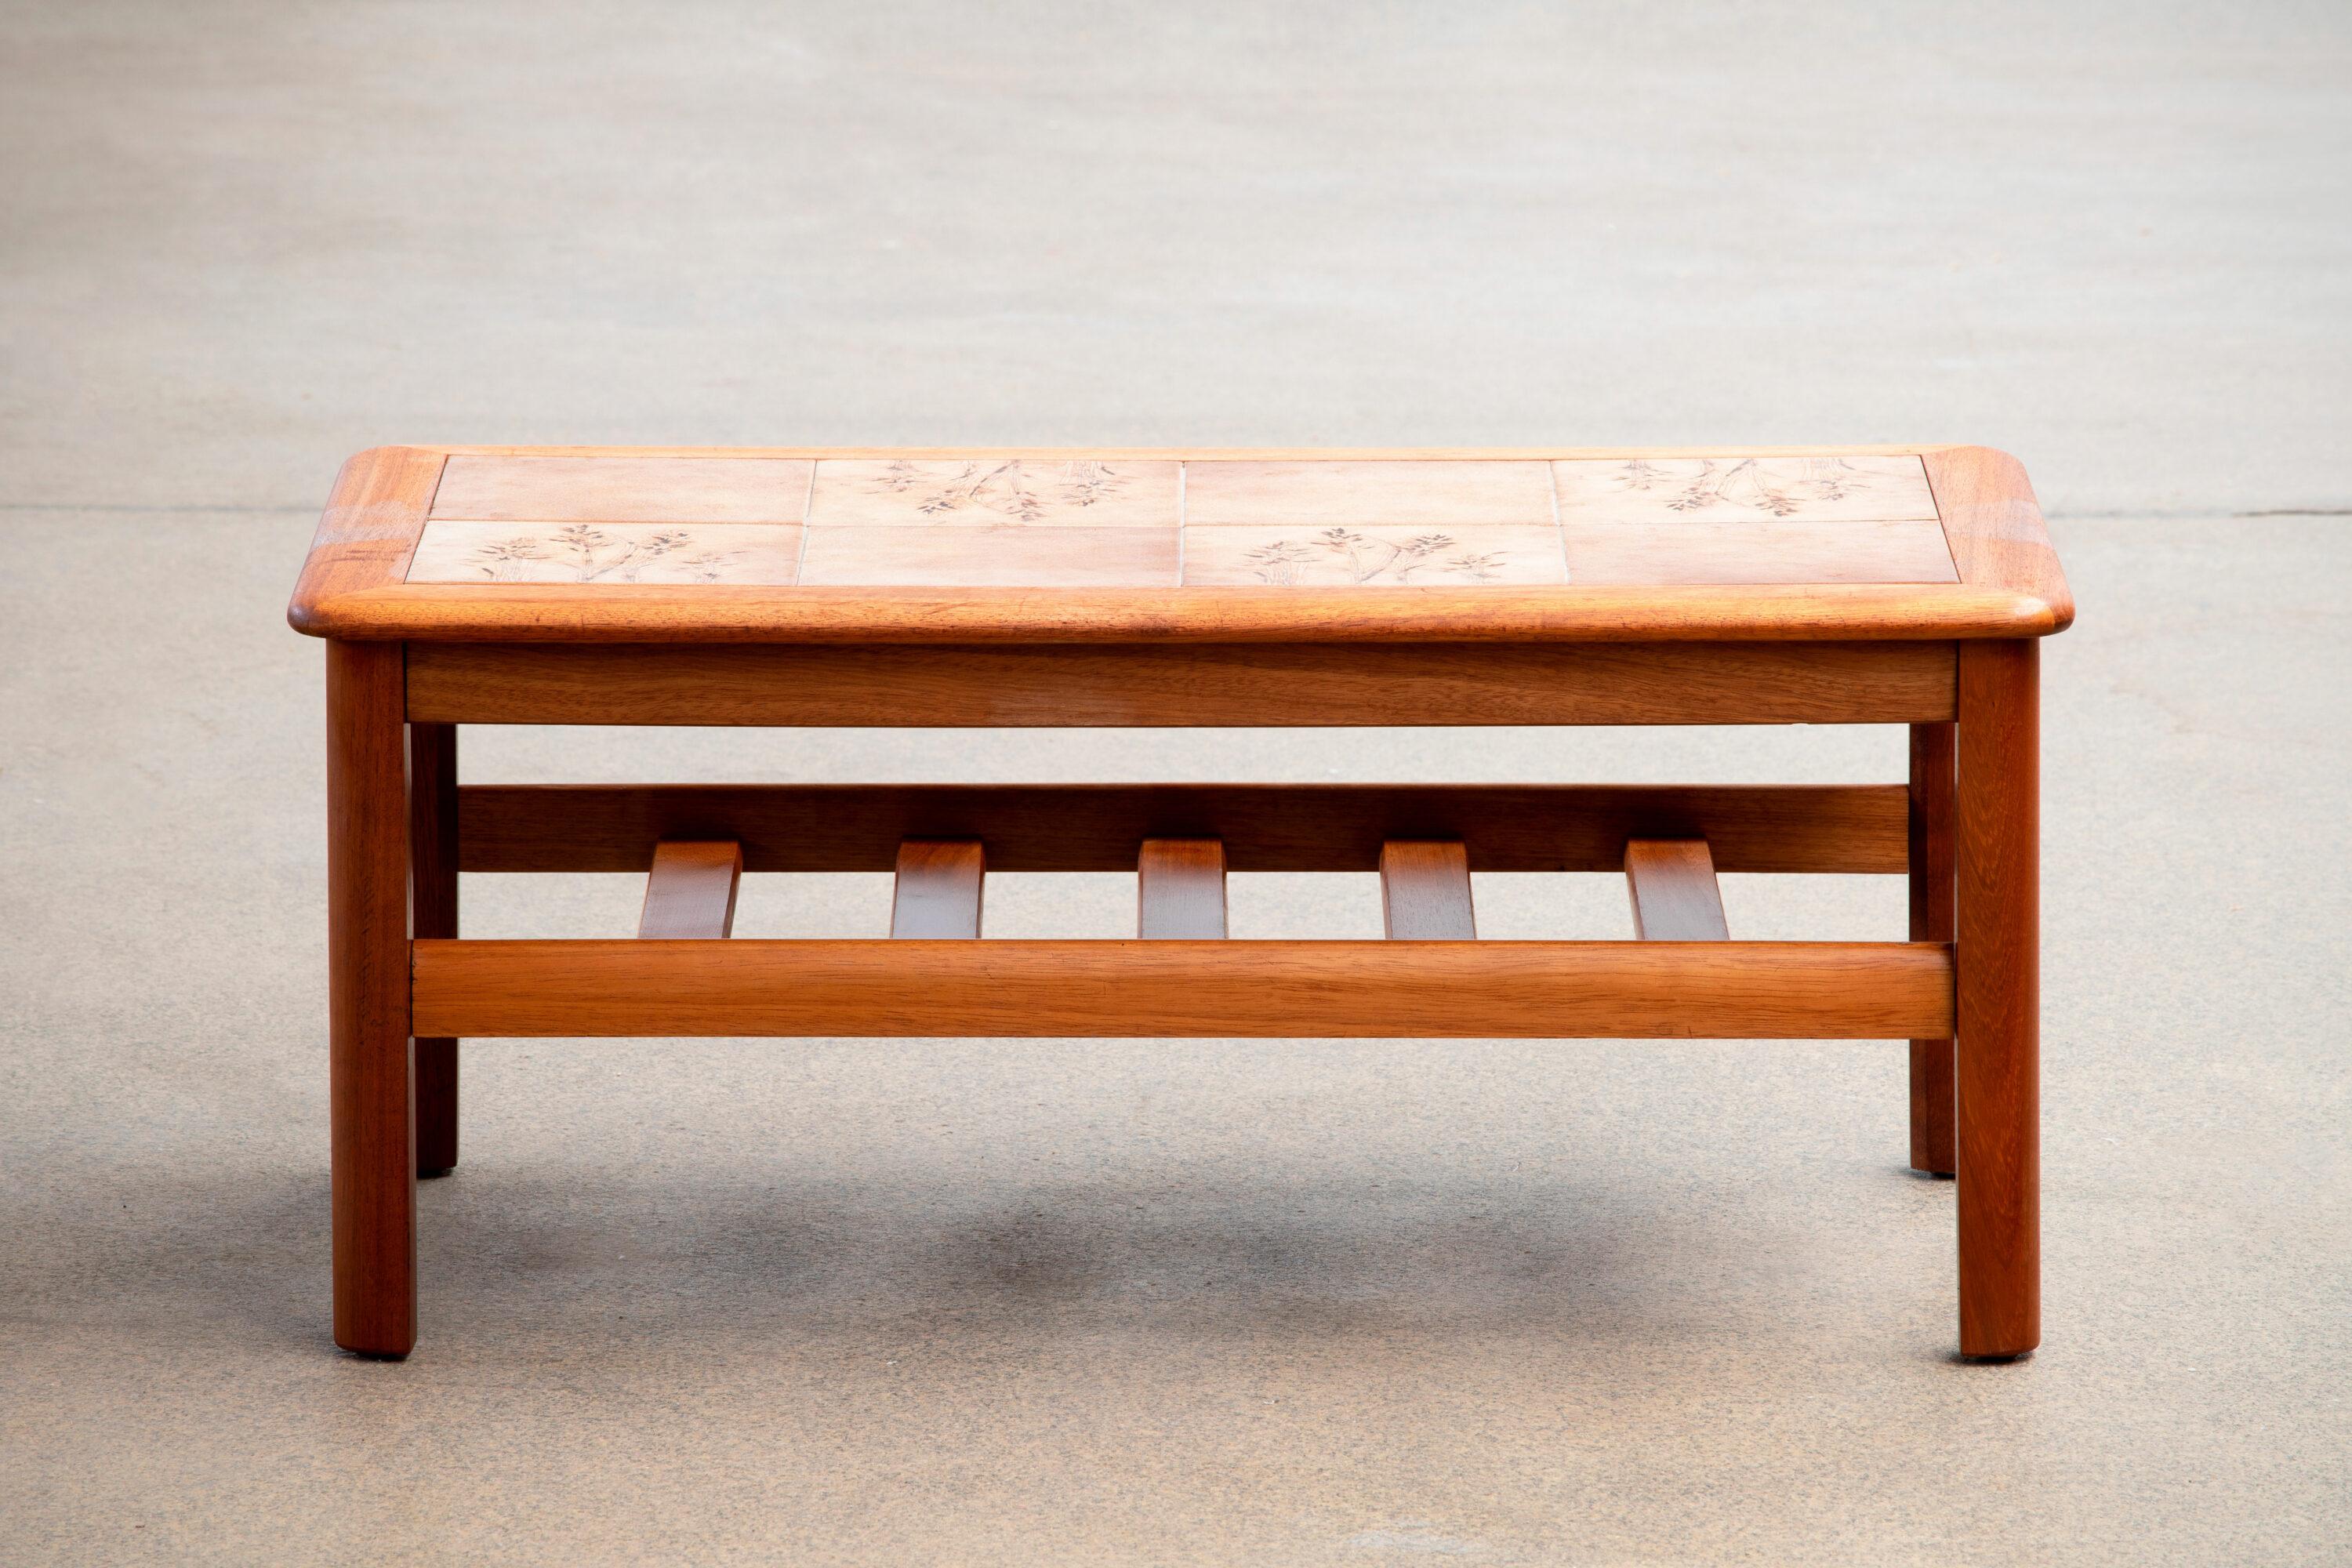 British Mid-Century Teak Coffee Table with Ceramic Details For Sale